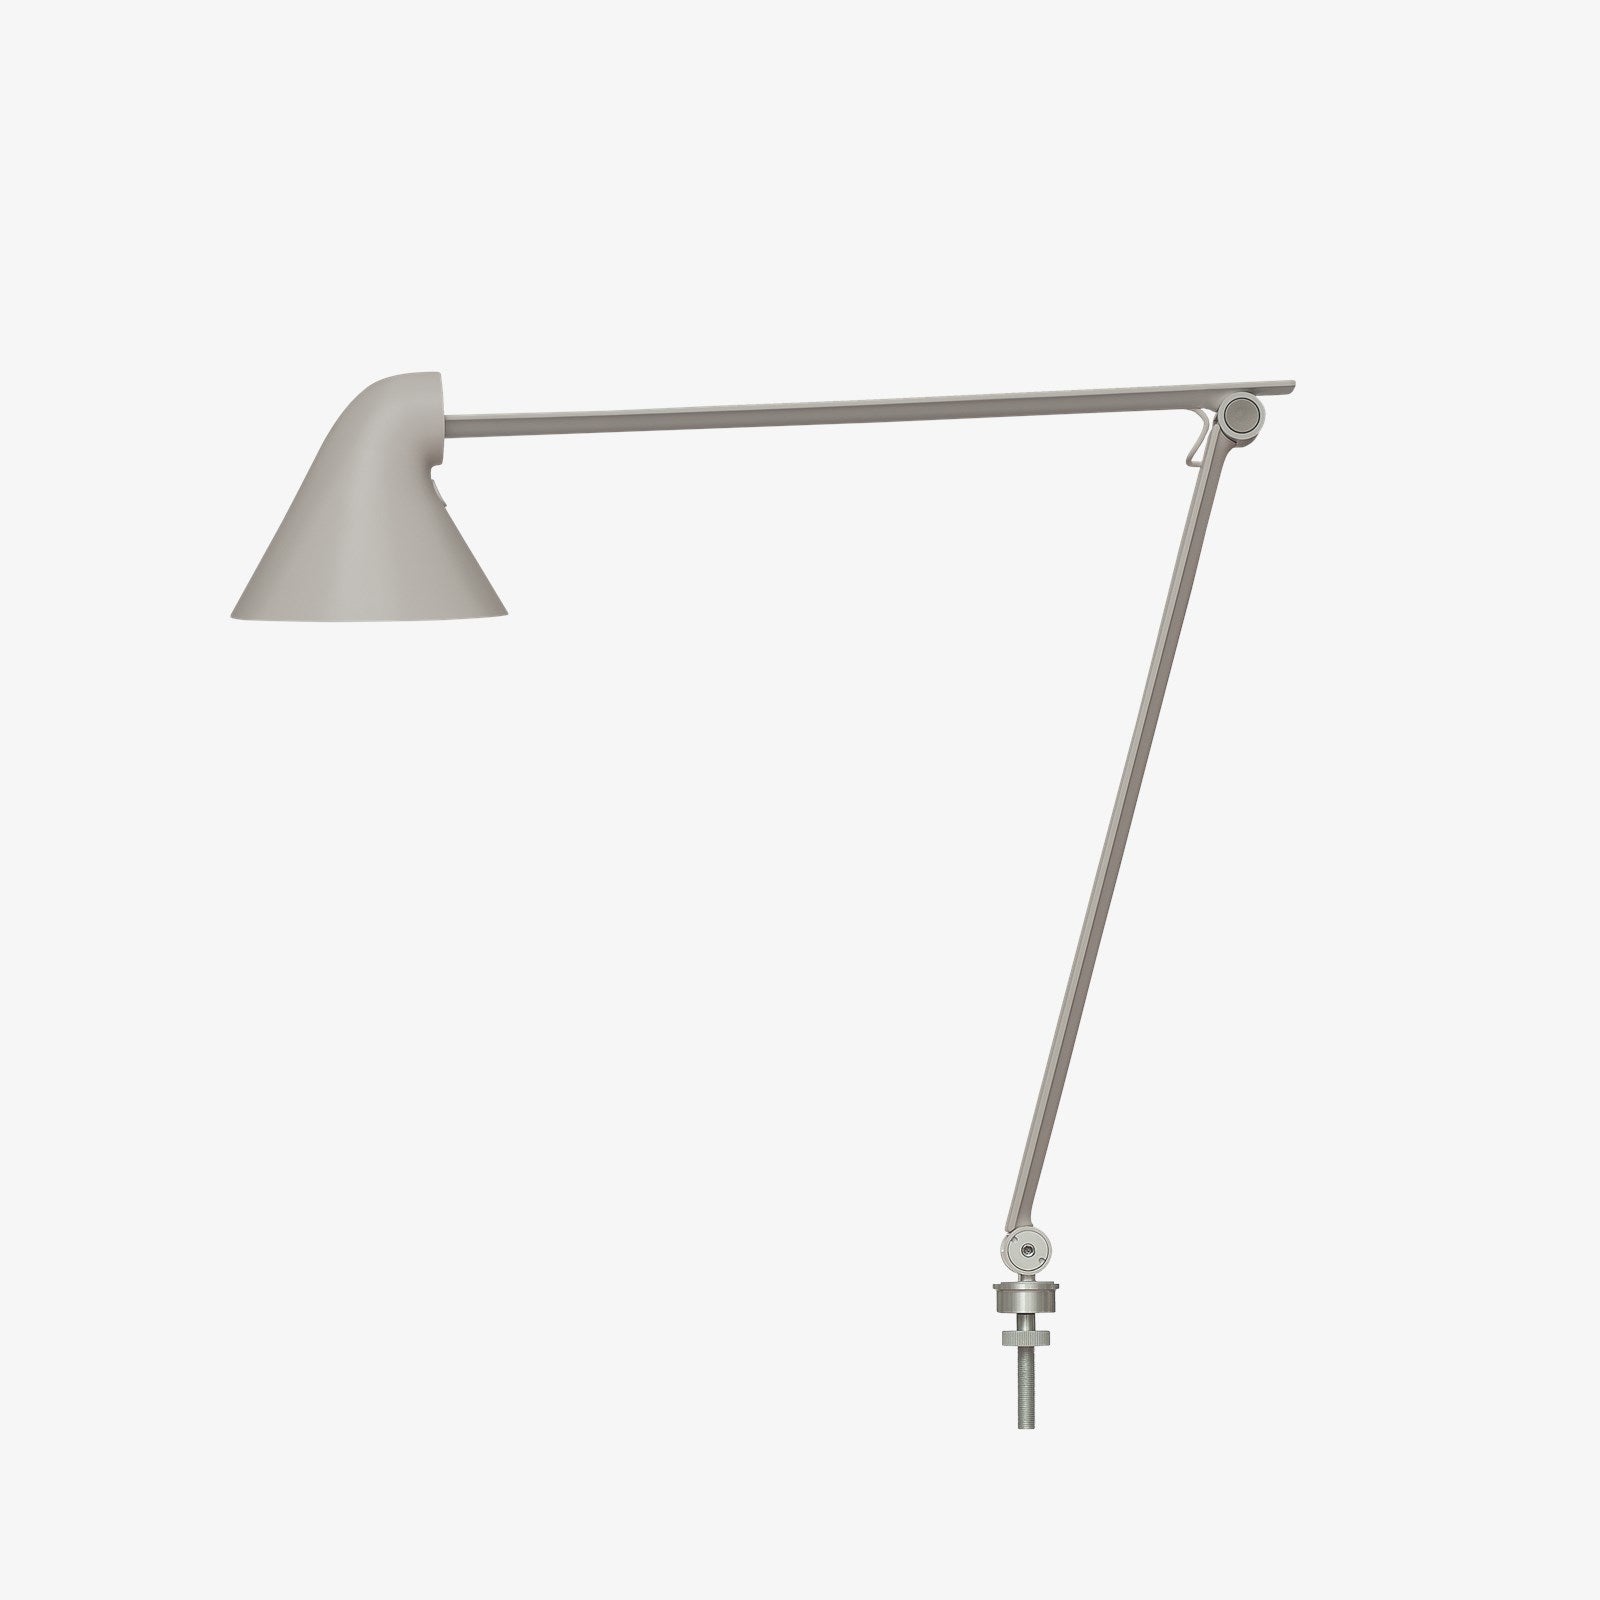 The NJP Table Lamp is a new interpretation of a classic architect lamp designed by Nendo design studio of Japan and designer Oki Sato. Its simple and honest look bares the lamp's functional components and makes it self-explanatory in its expression. The lamp features a timer function that can be set to turn the lamp off at after four or eight hours. Its ergonomic design and simple mechanical system provides great freedom of movement, so that light can always be set in the ideal position in the workspace.